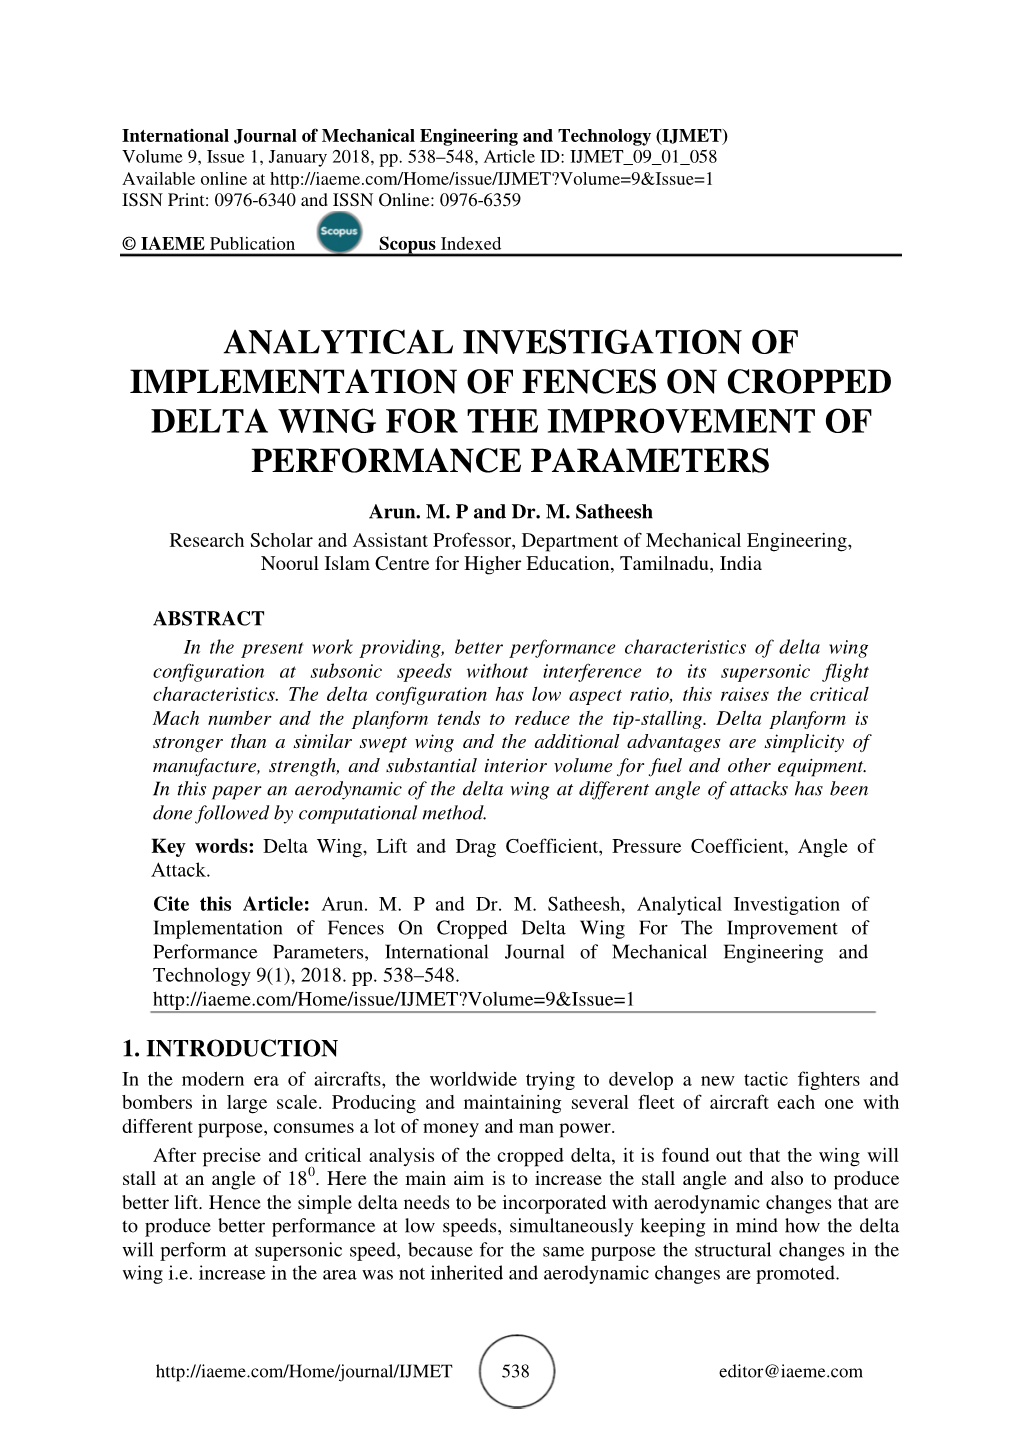 Analytical Investigation of Implementation of Fences on Cropped Delta Wing for the Improvement of Performance Parameters